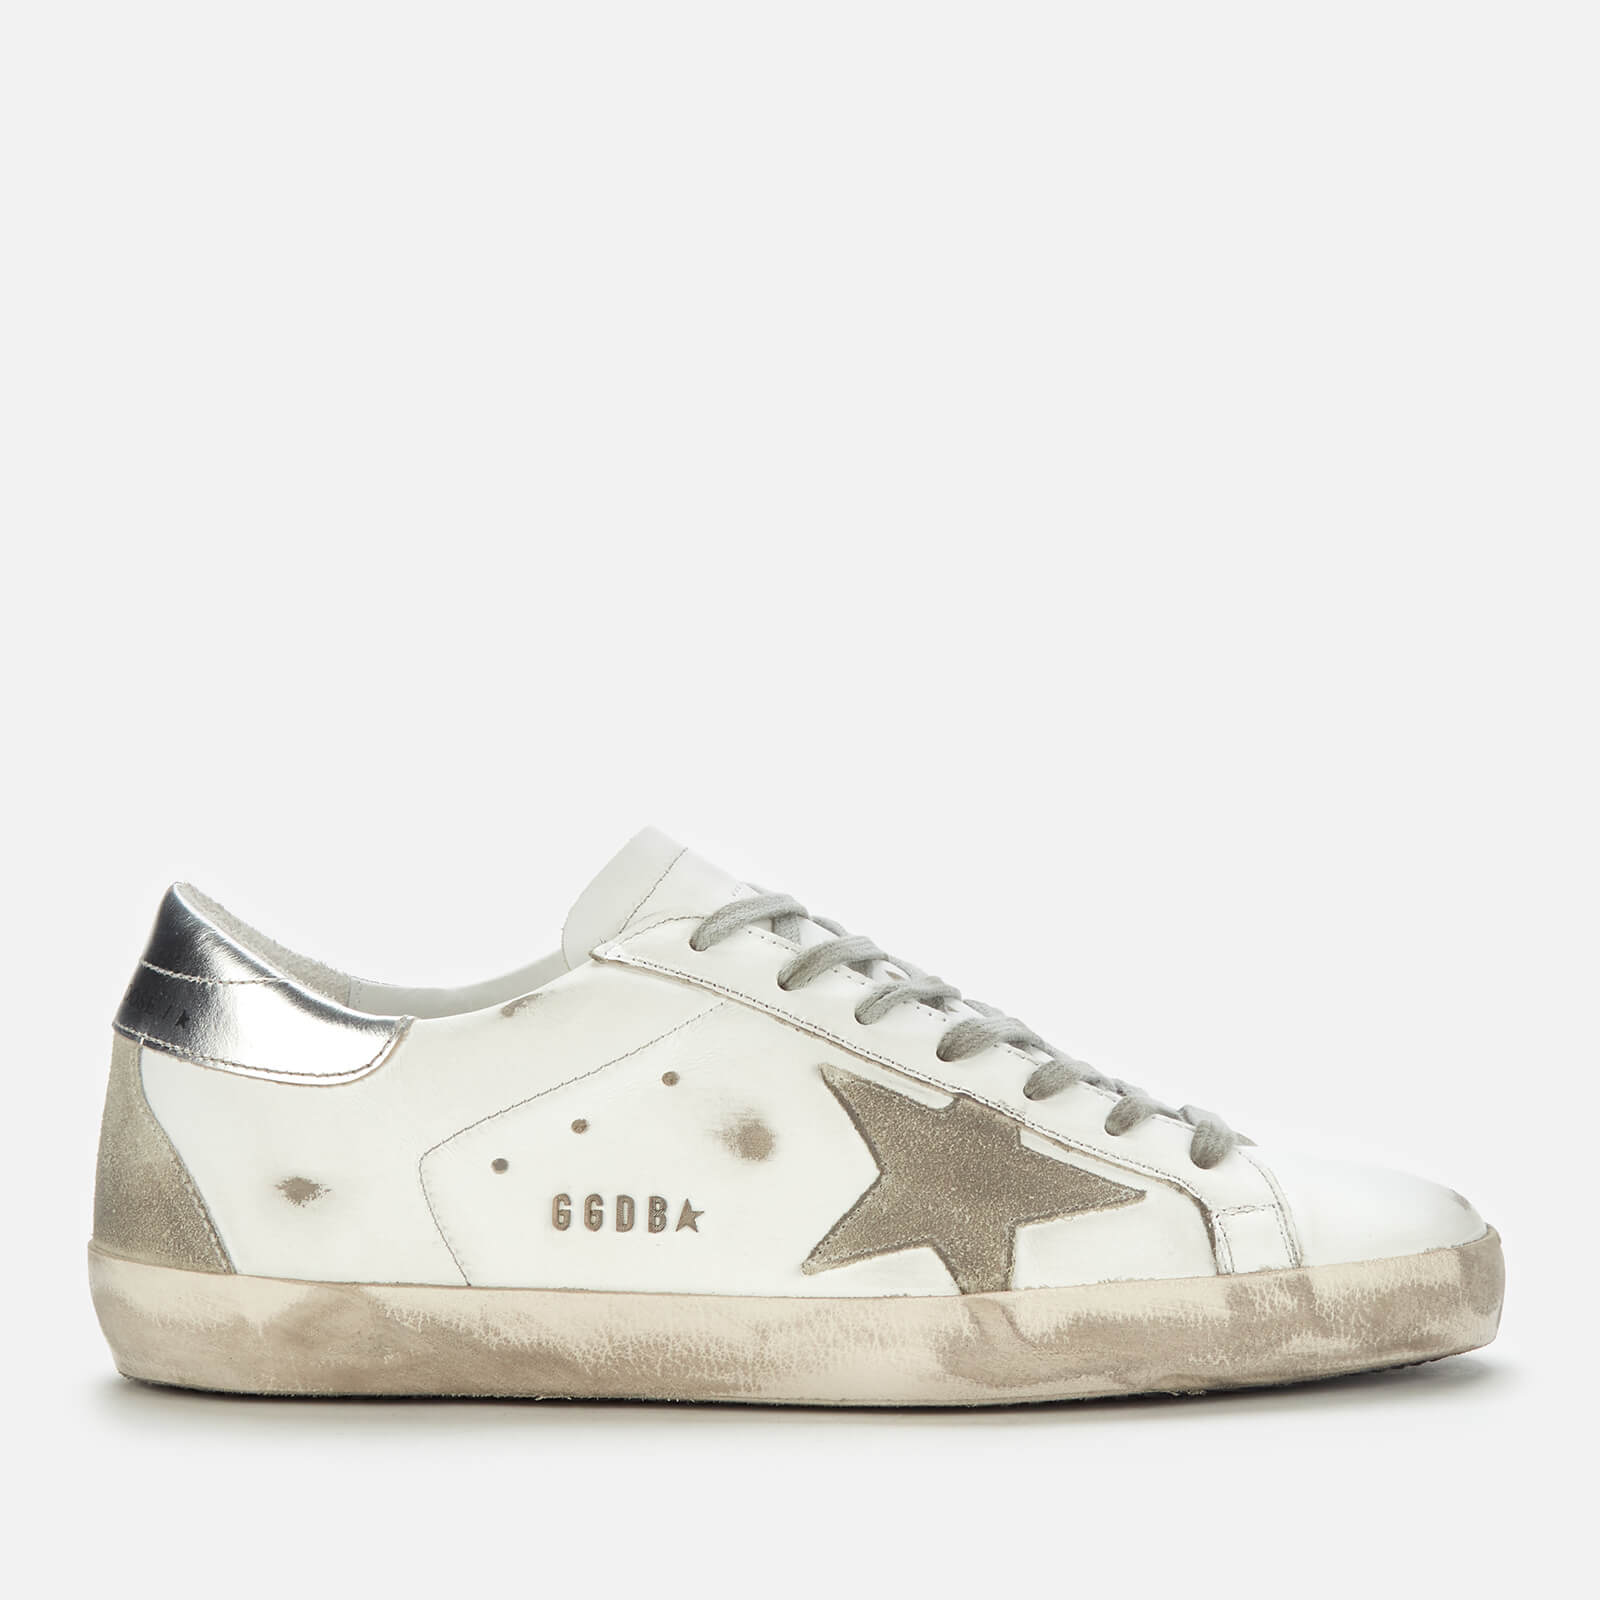 Golden Goose Deluxe Brand Men's Superstar Leather Trainers - White/Ice/Silver - UK 11